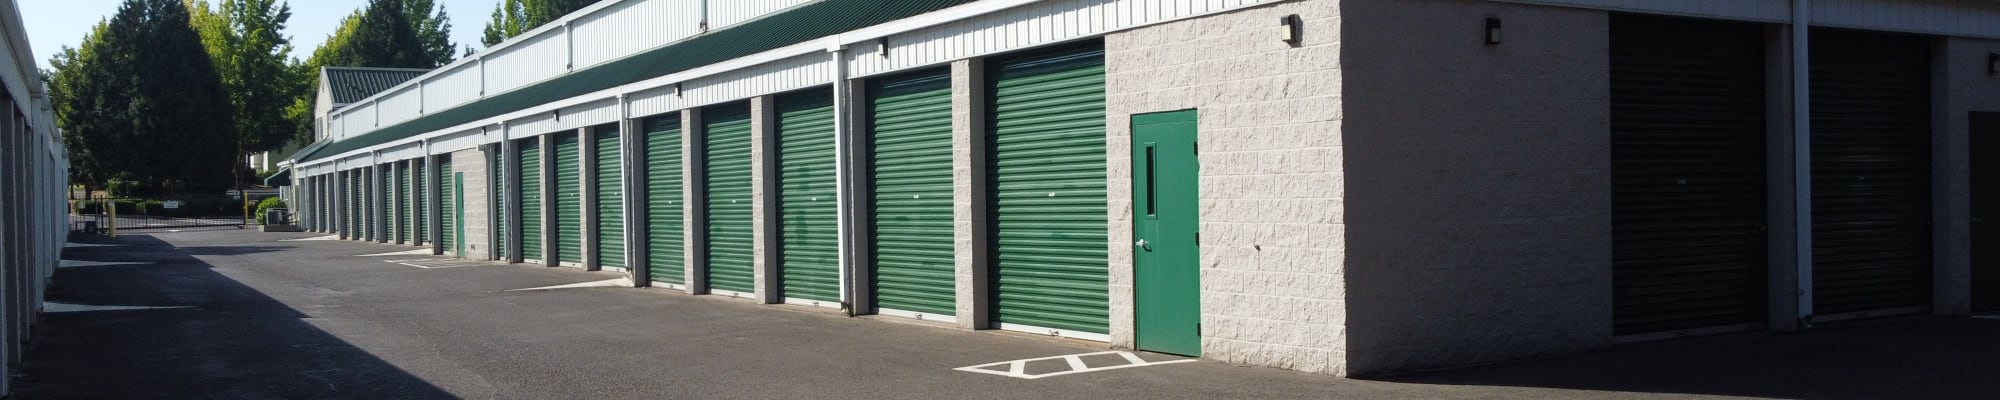 Get a quote for a storage unit at A Storage Place in Chino, California